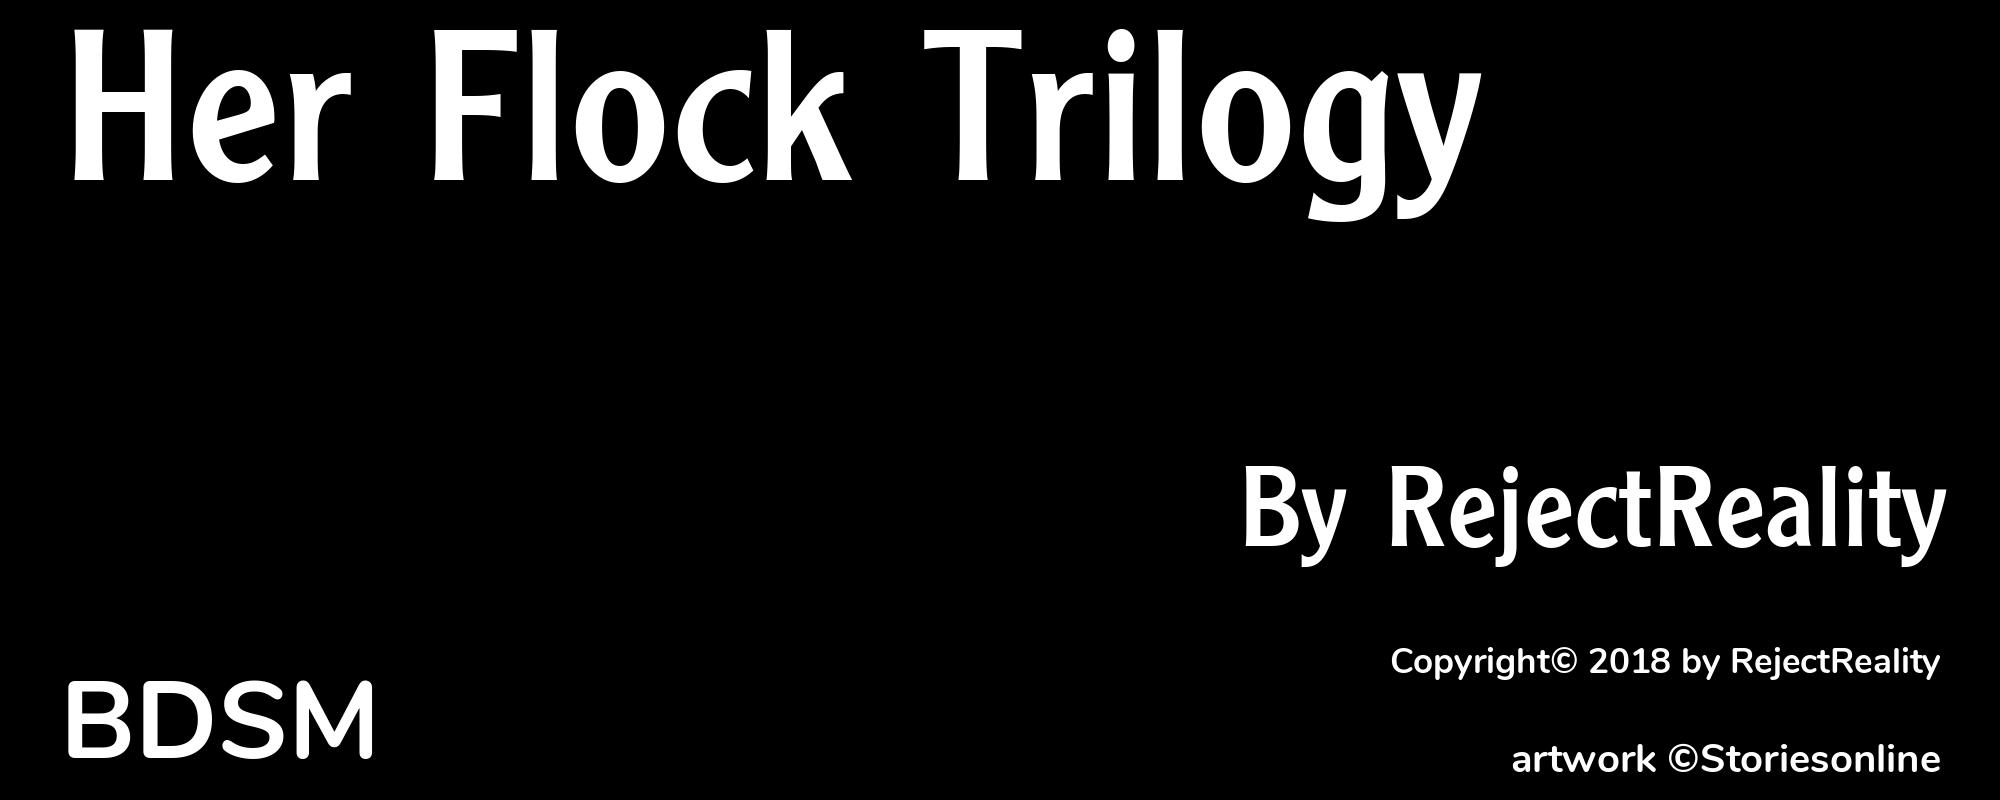 Her Flock Trilogy - Cover